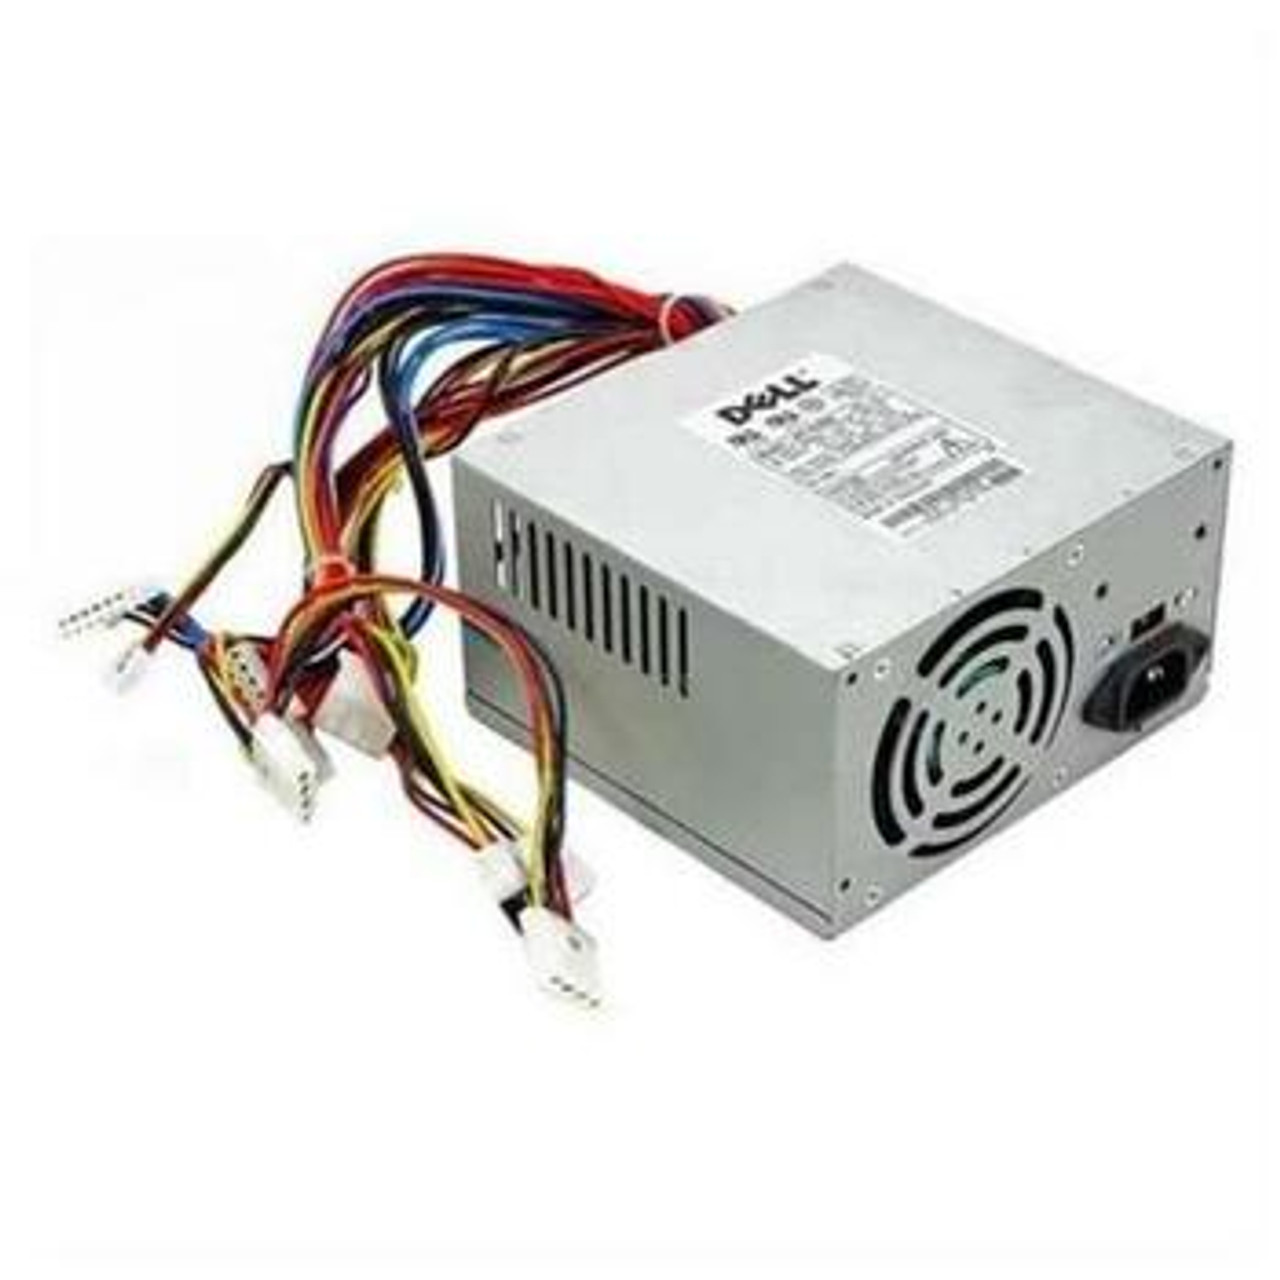 00726C Dell 330-Watts Power Supply for PowerEdge 2300